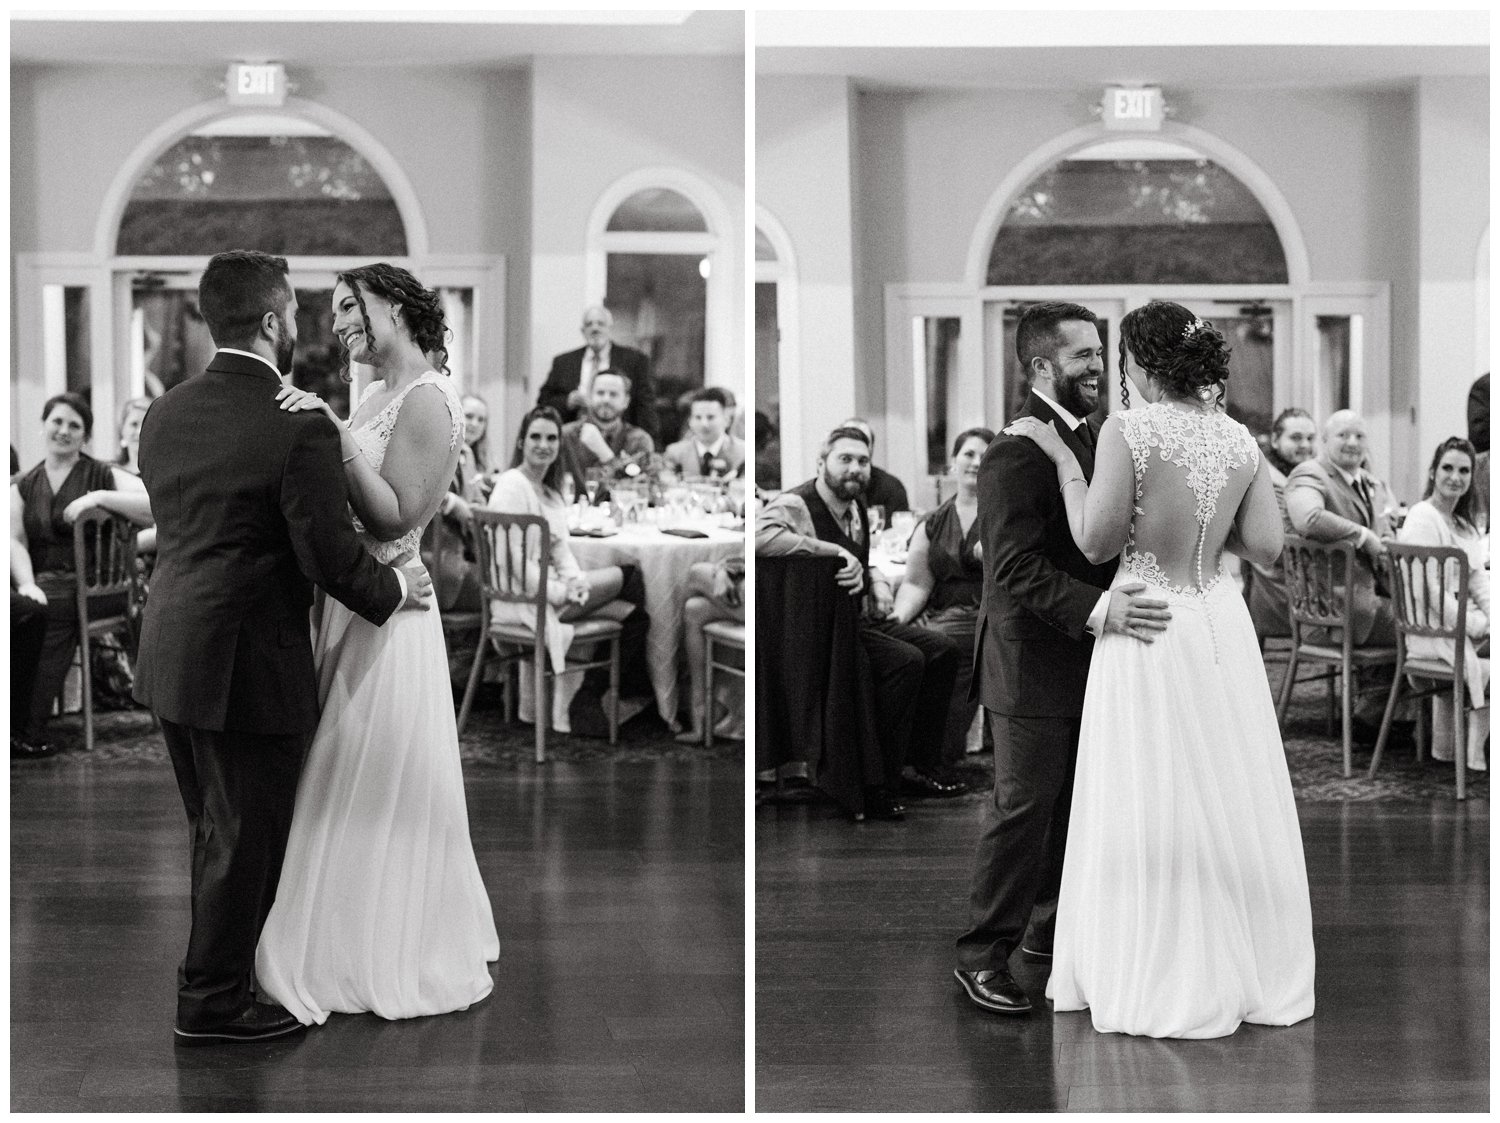 The first dance at the intimate destination wedding in black and white photos